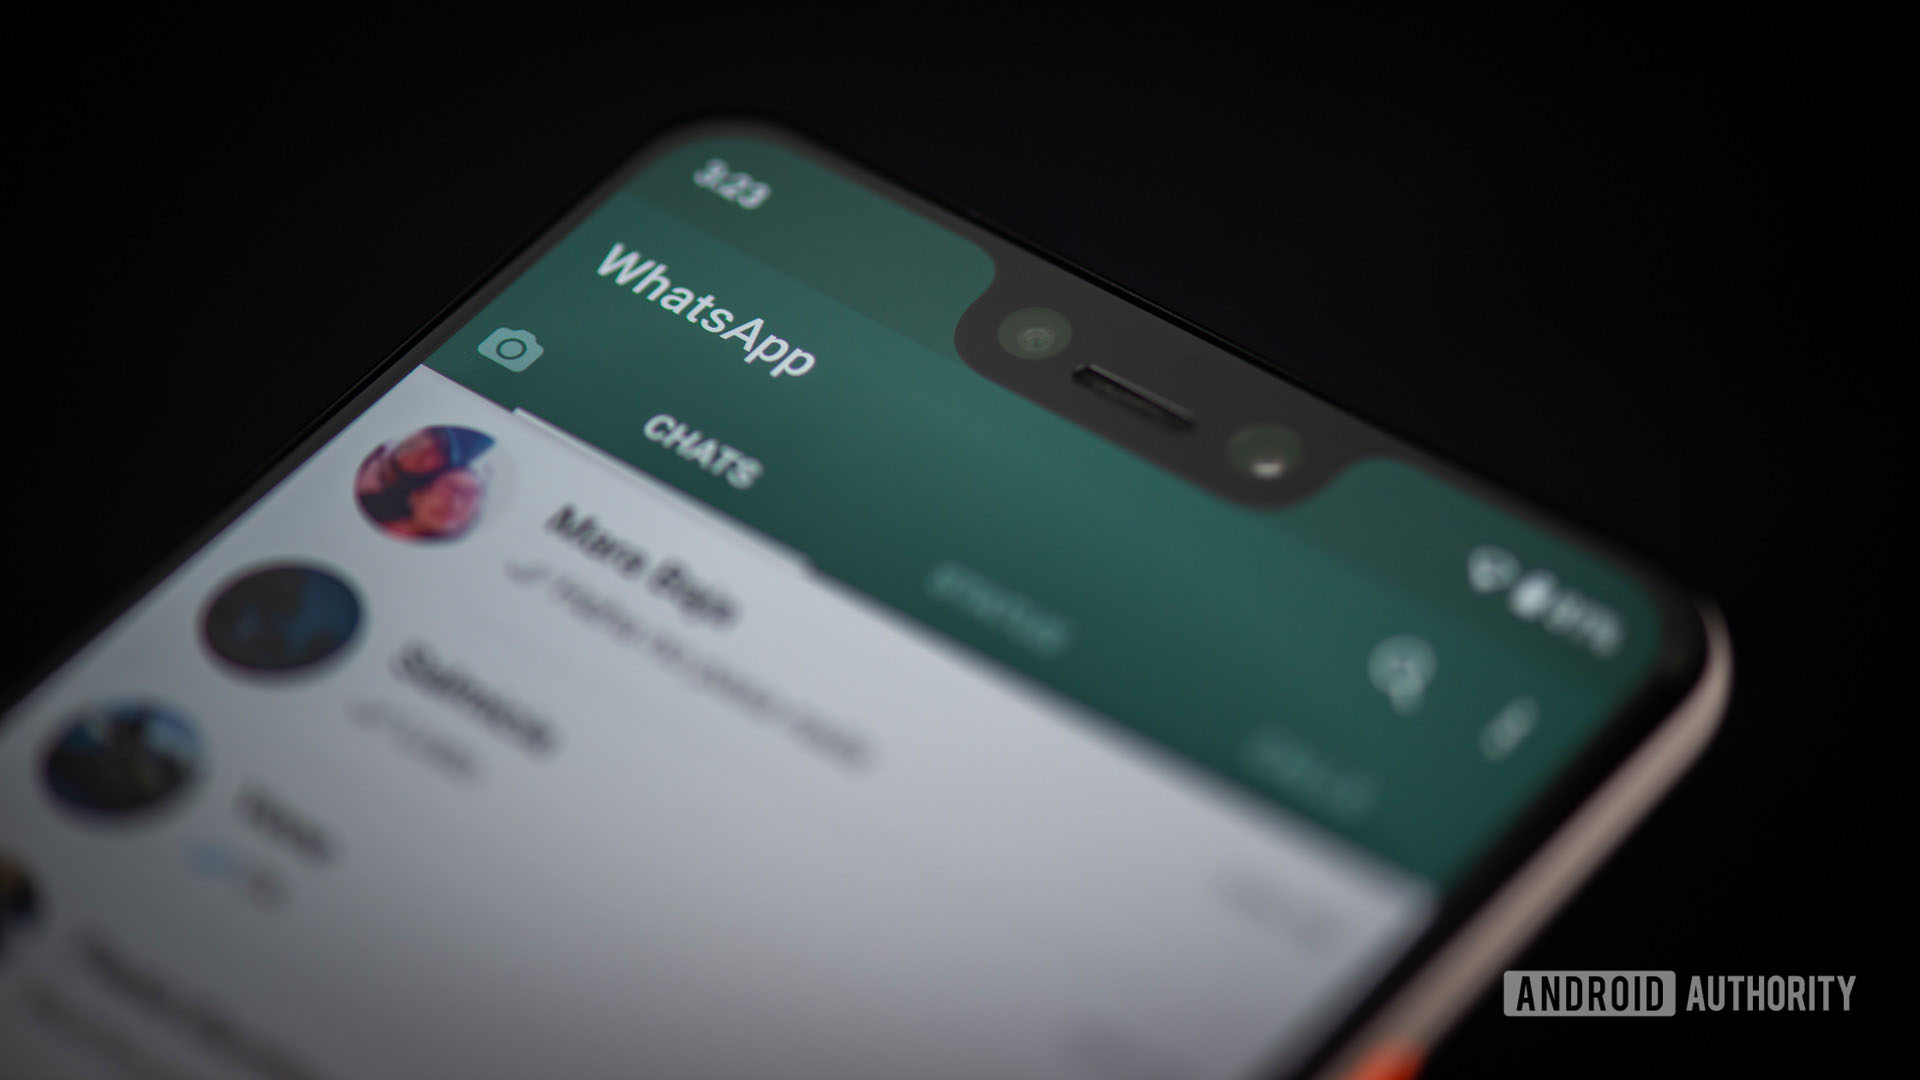 This way you can hide personal chats on WhatsApp!, no need for third party app